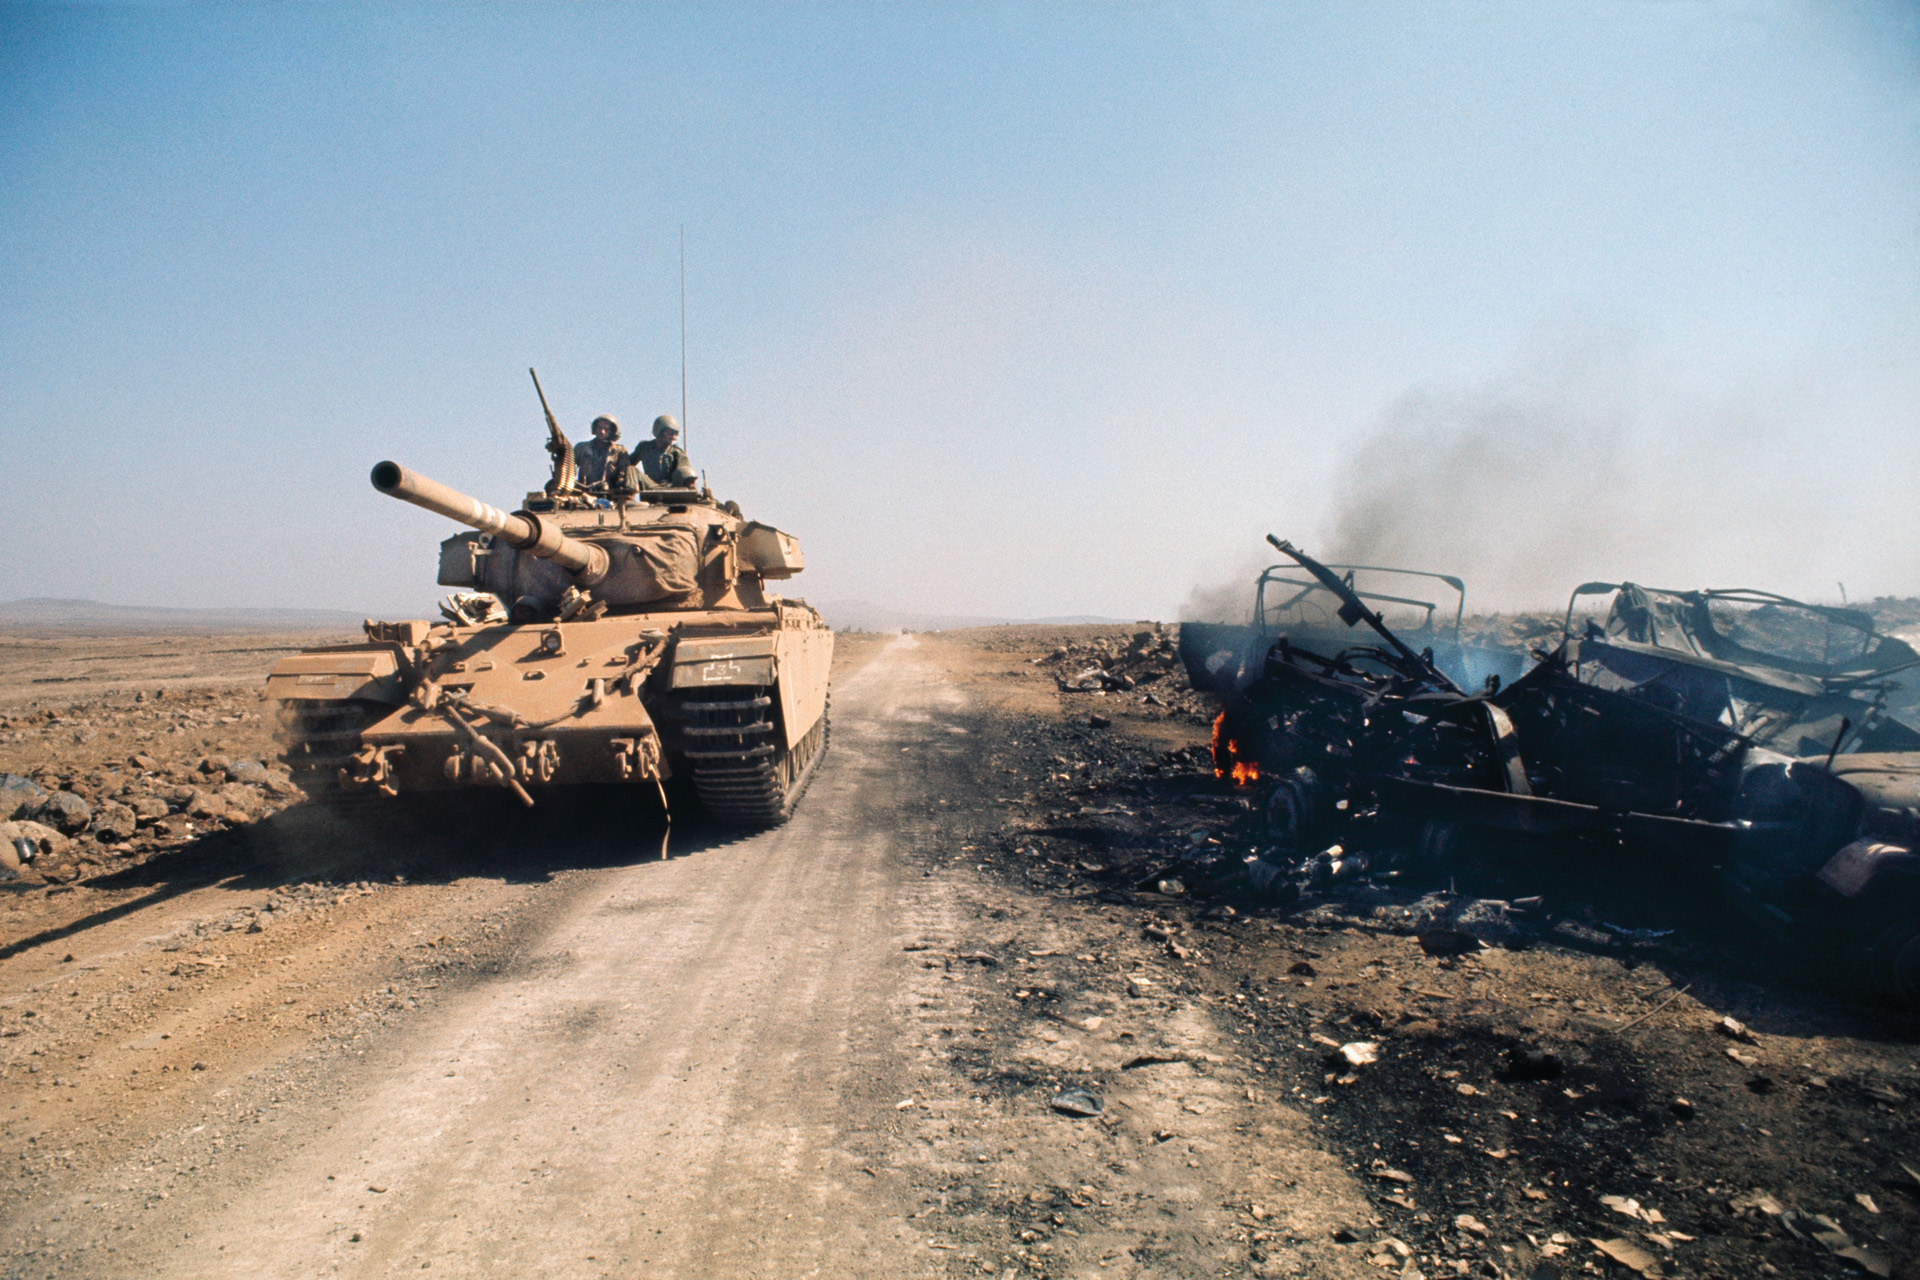 An Israeli tank passes scorched enemy vehicles during the 1973 Arab-Israeli War. Egypt deployed large numbers of missile-armed infantry in the Sinai that inflicted substantial losses on Israeli armor in the opening stage of the conflict.